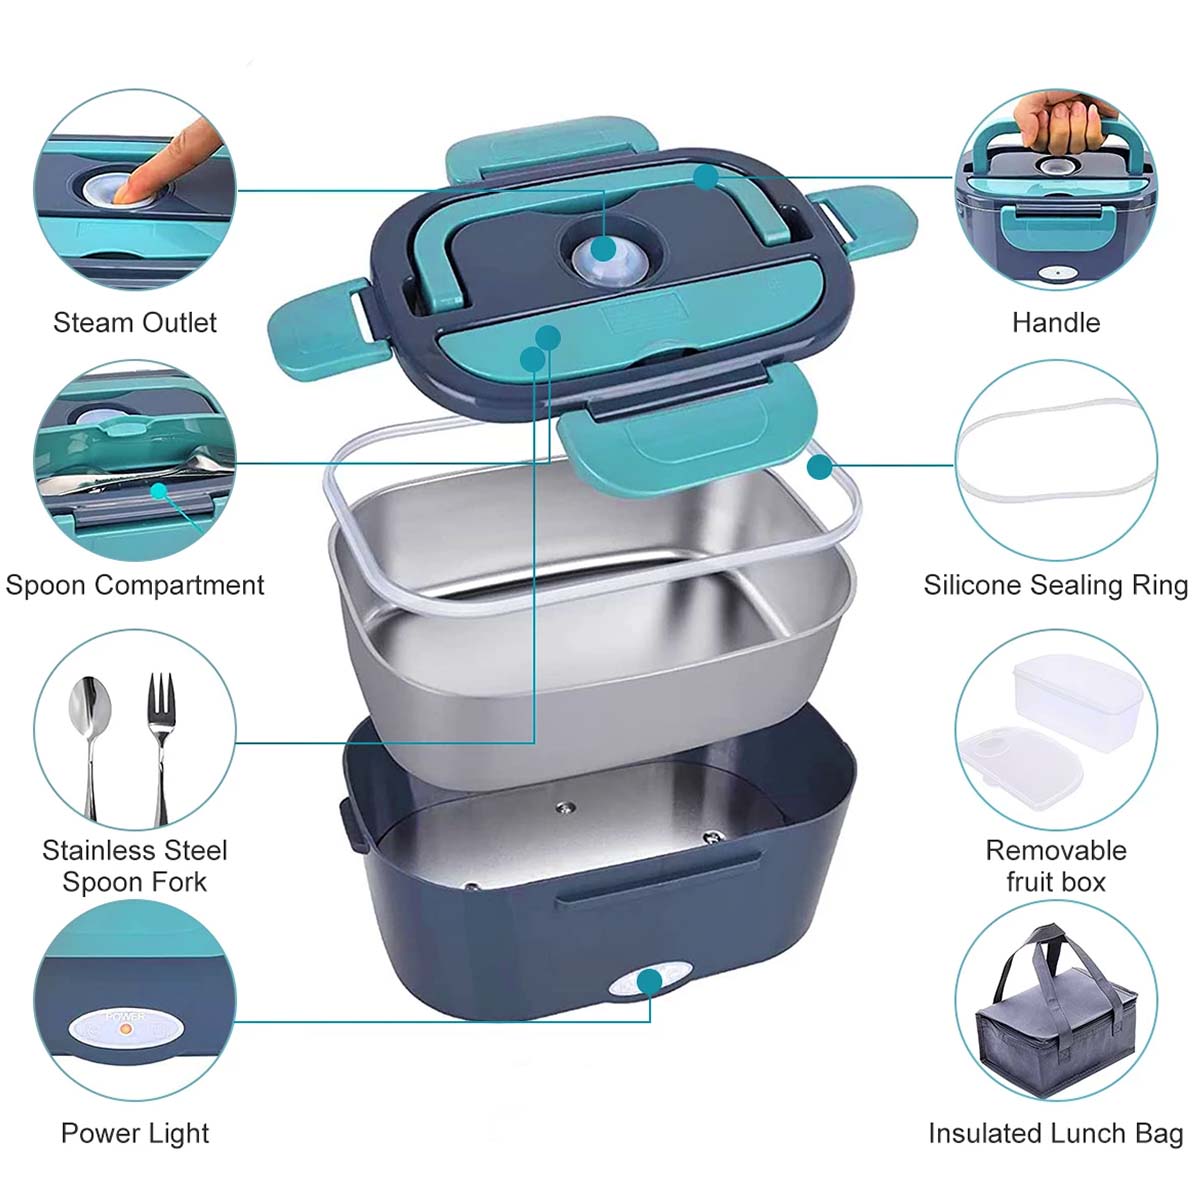 How Does The Waterless Electric Lunchbox Work?